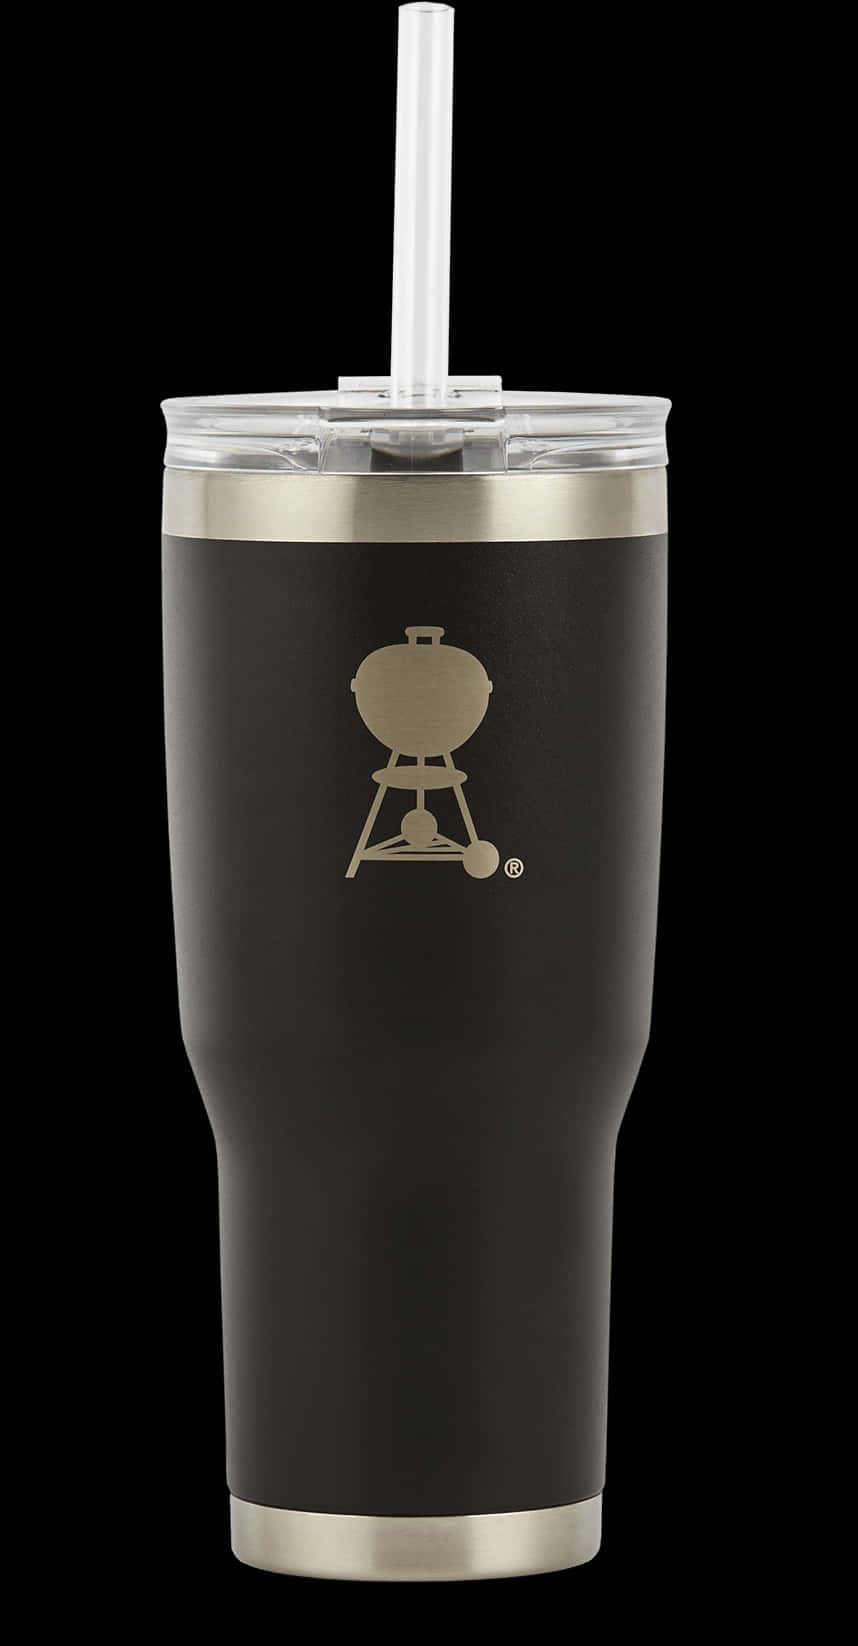 A Black And Silver Tumbler With A Grill Logo